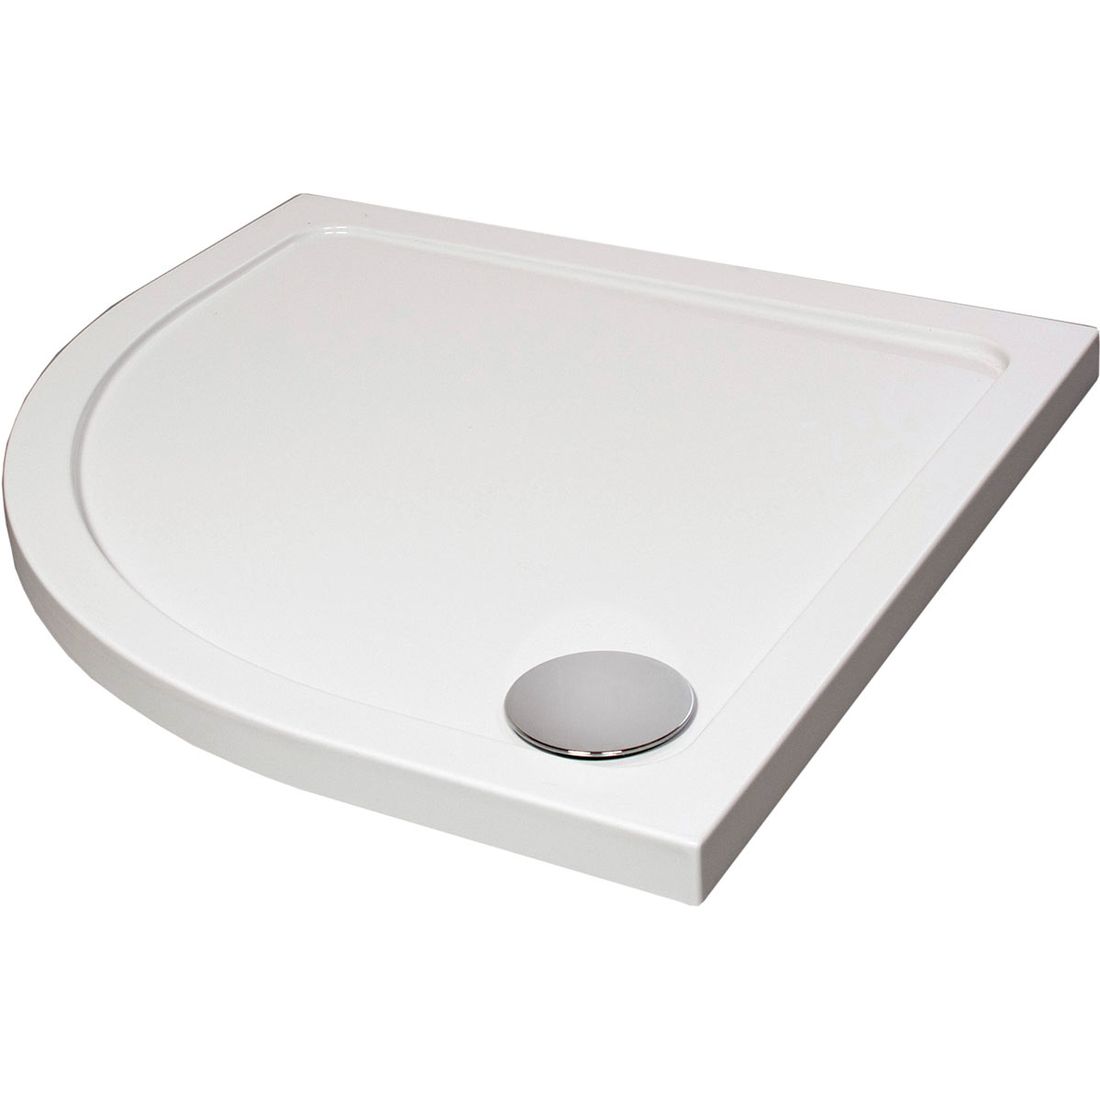 Shower Tray 800Mm Quadrant Low Profile Abs White